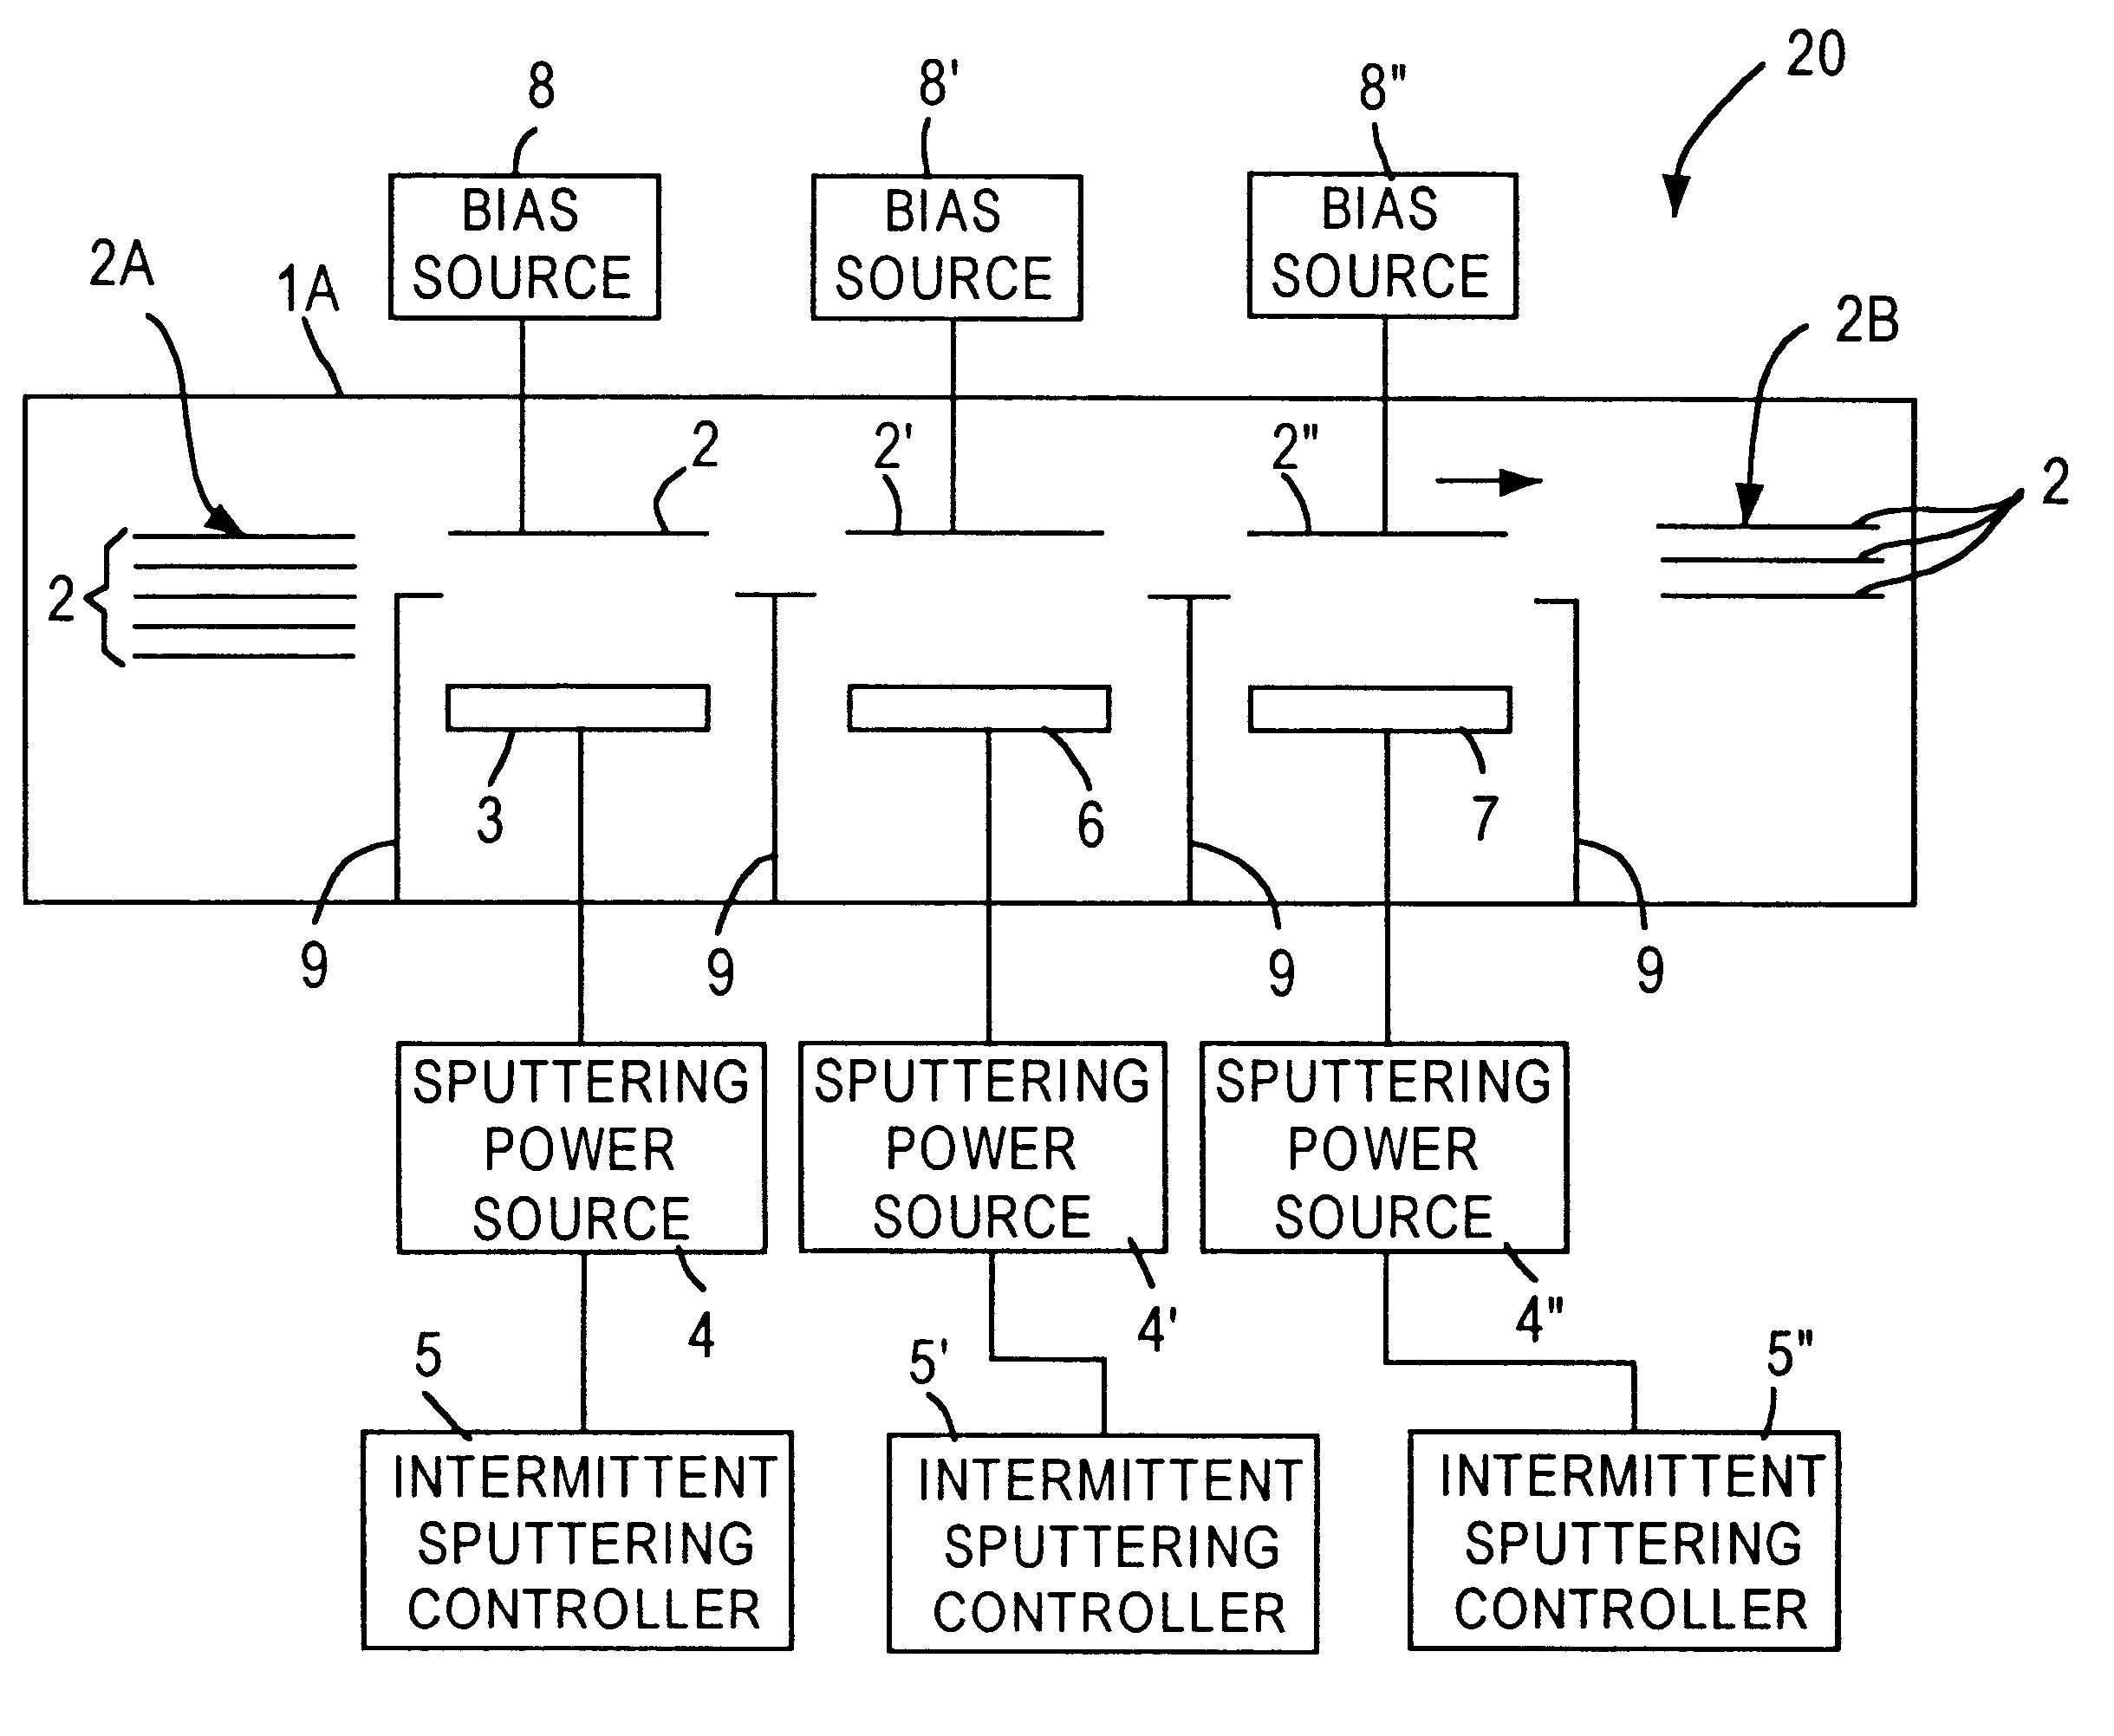 Sputter deposition utilizing pulsed cathode and substrate bias power